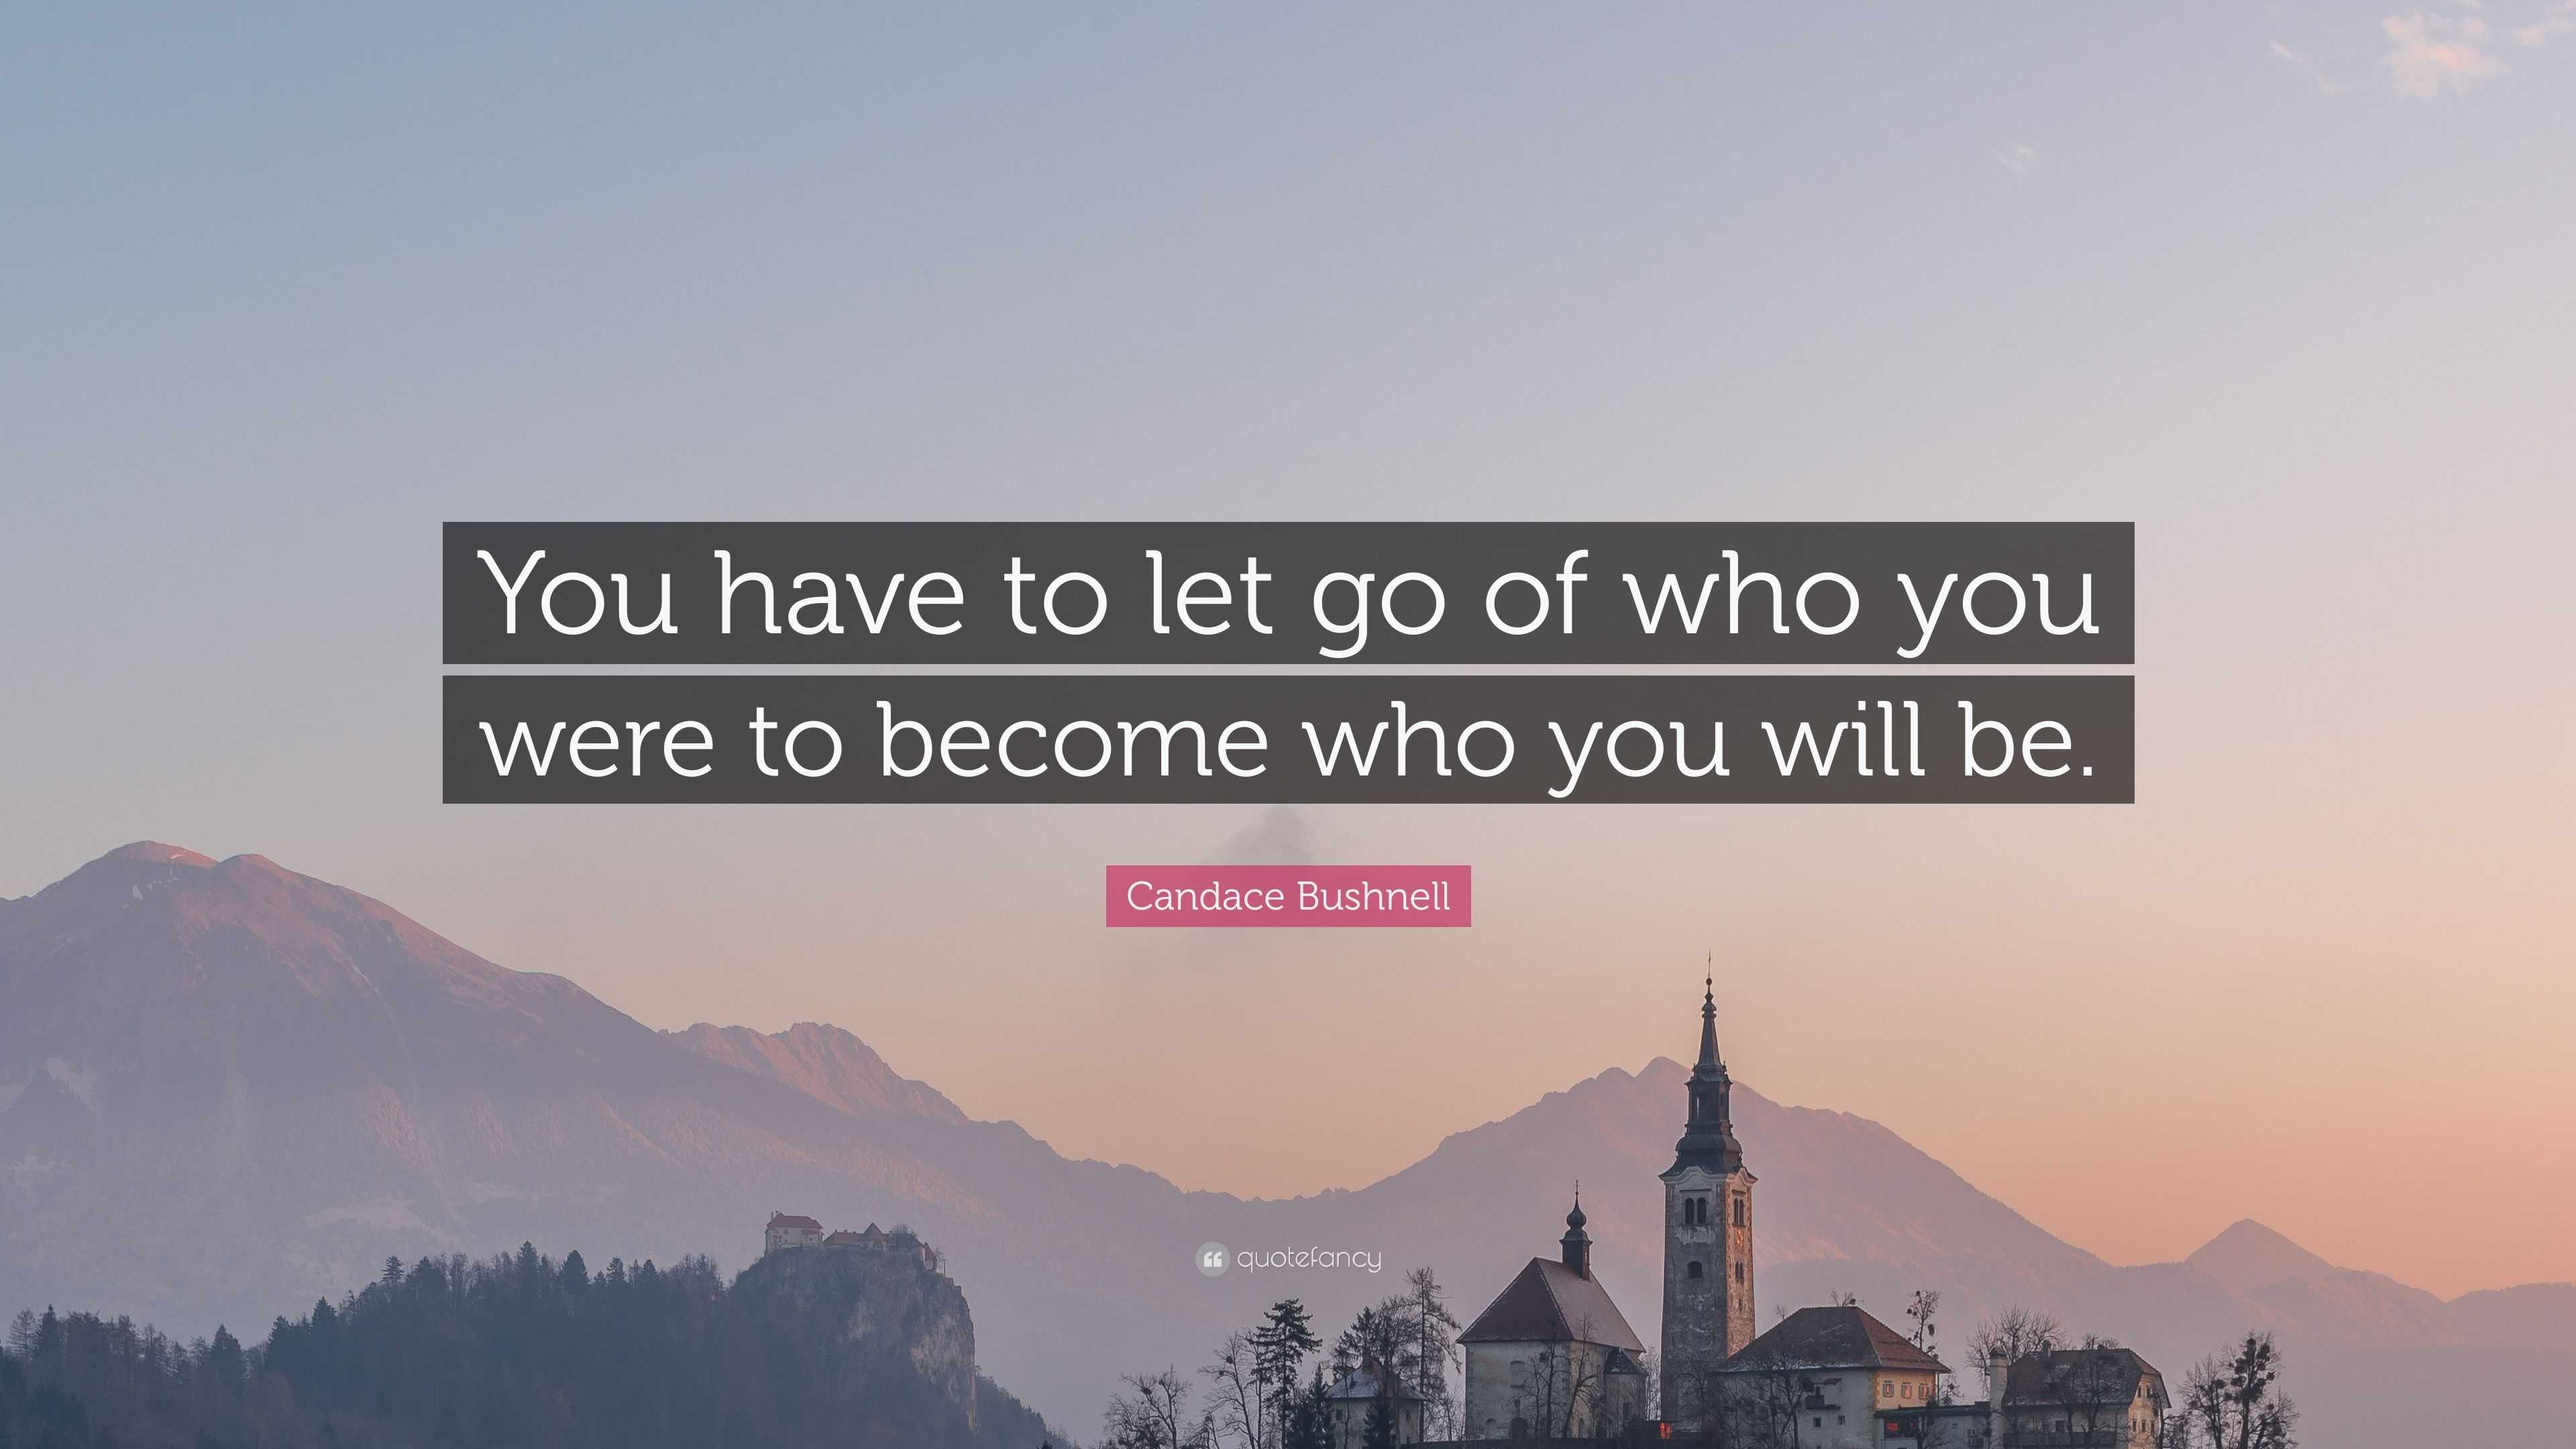 Candace Bushnell Quote: “You have to let go of who you were to become ...